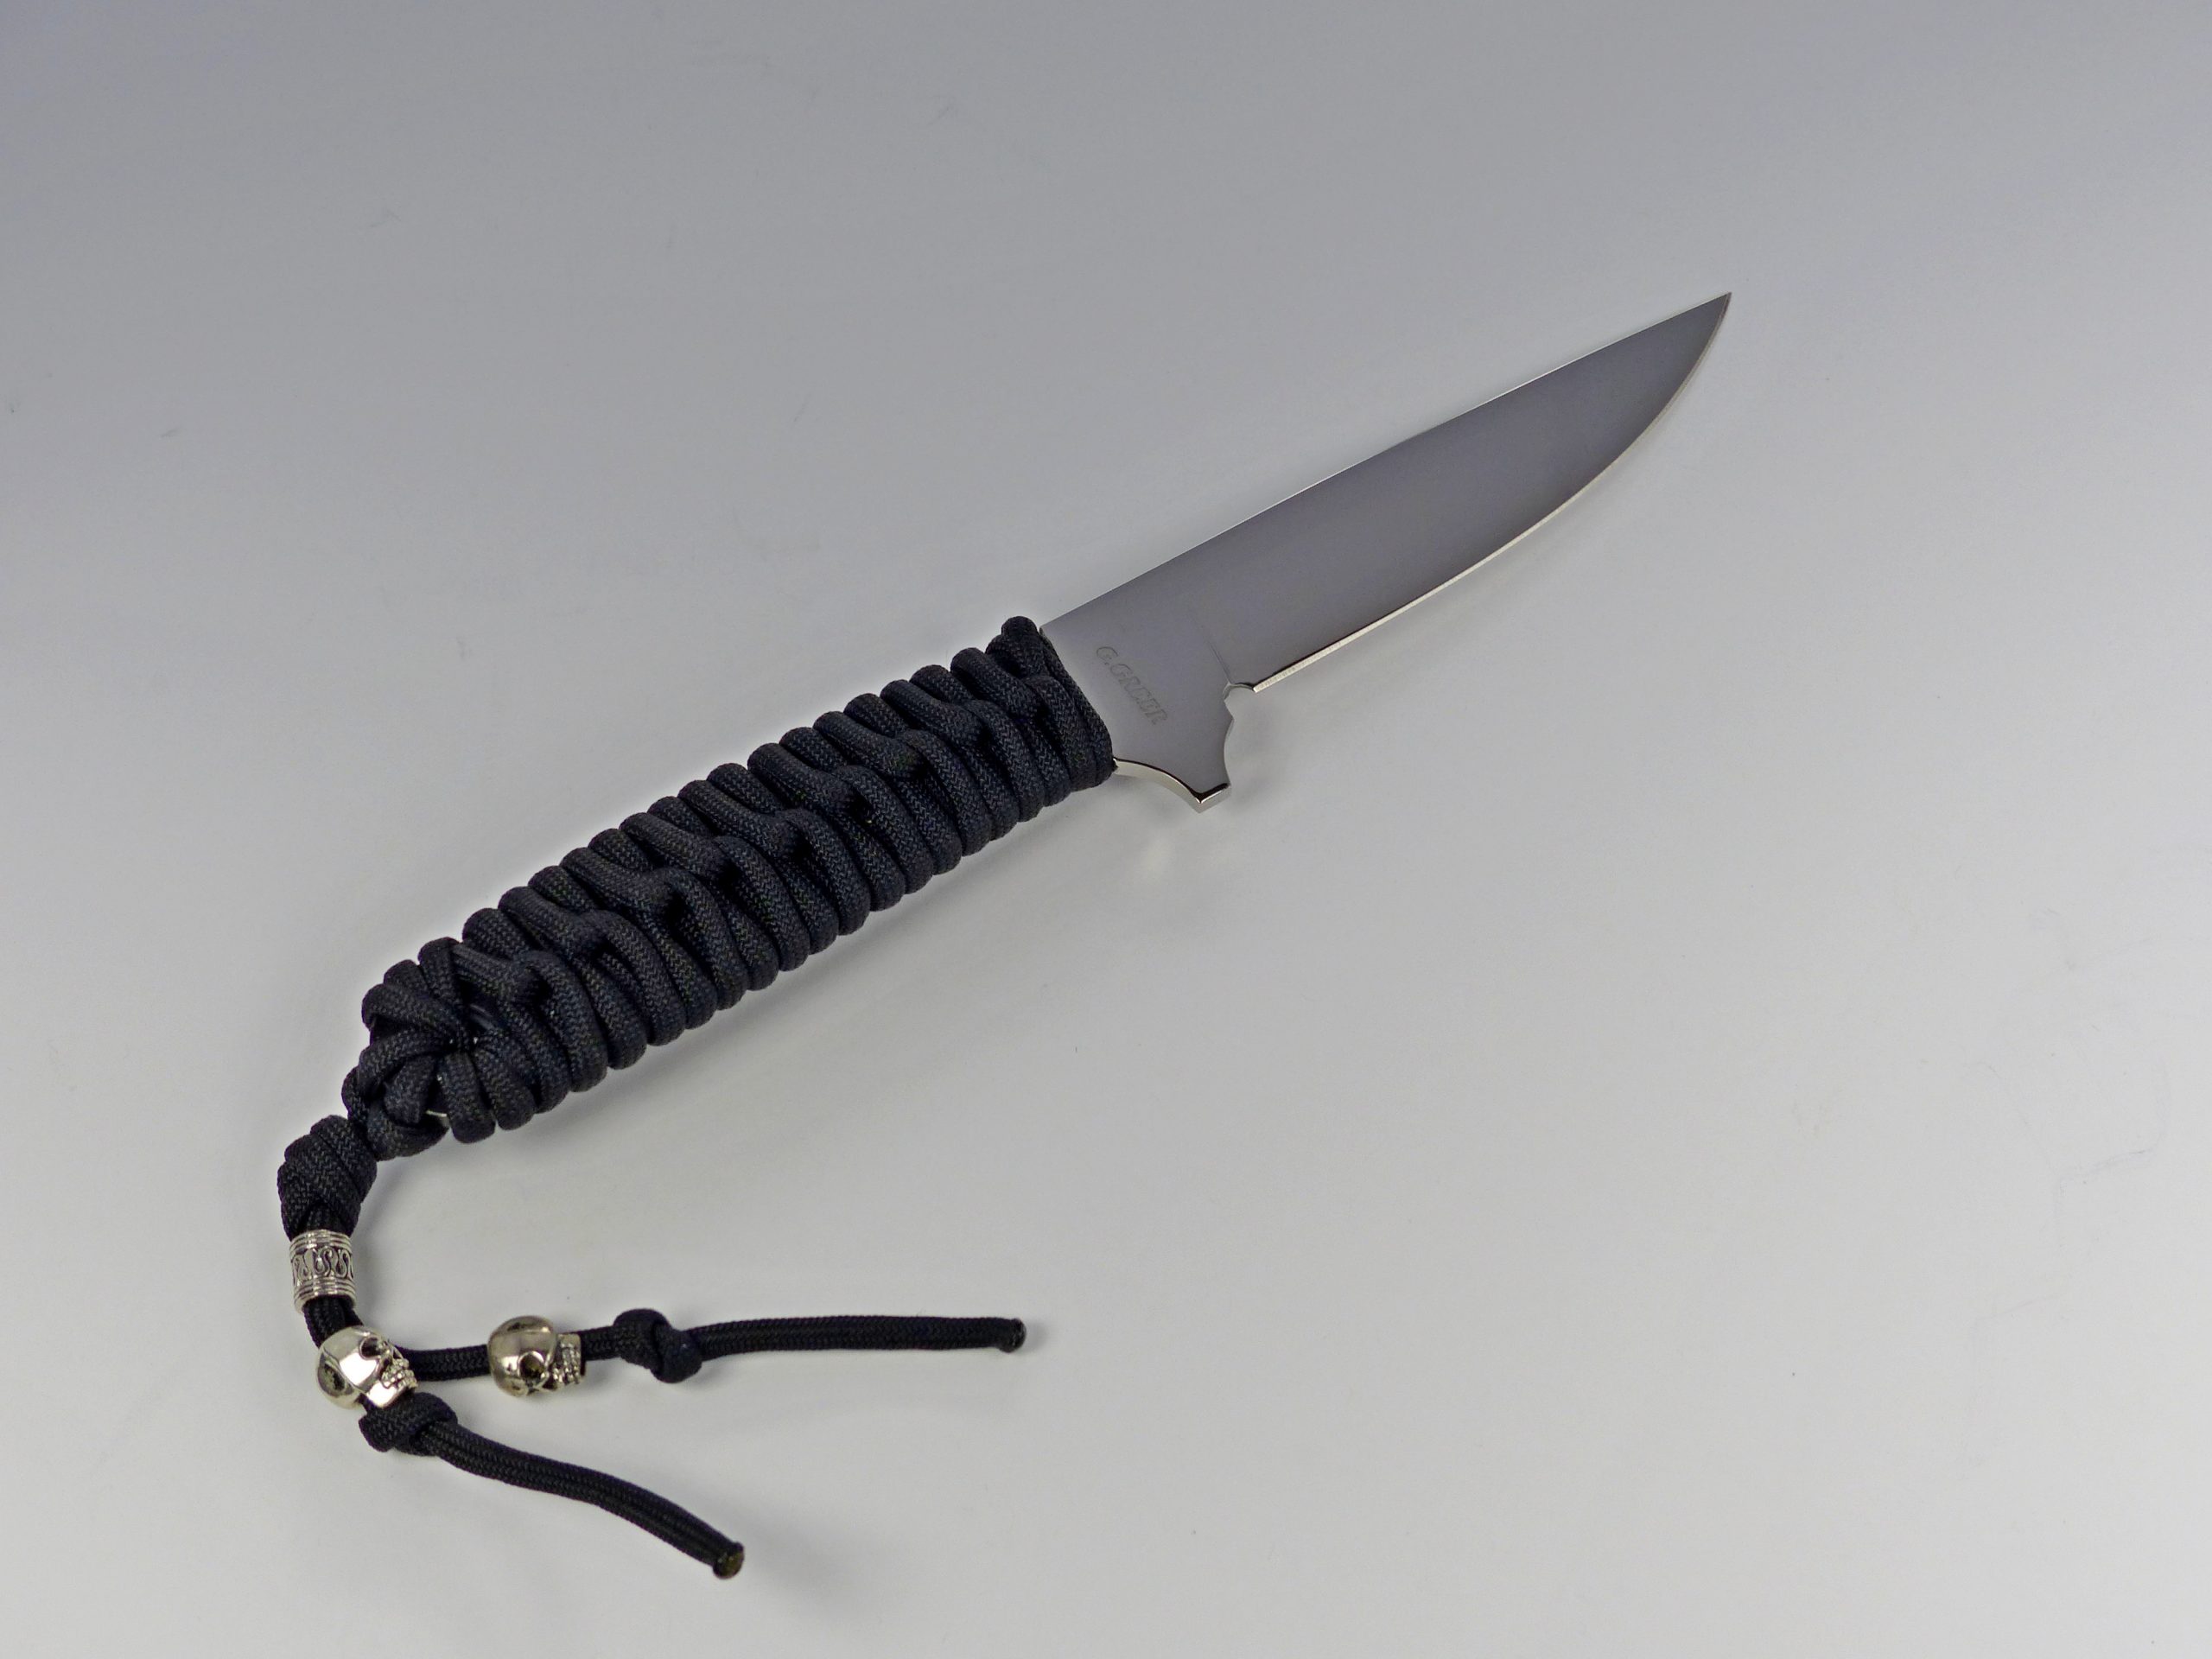 P4 - Black Paracord camping knife with a chisel grind blade